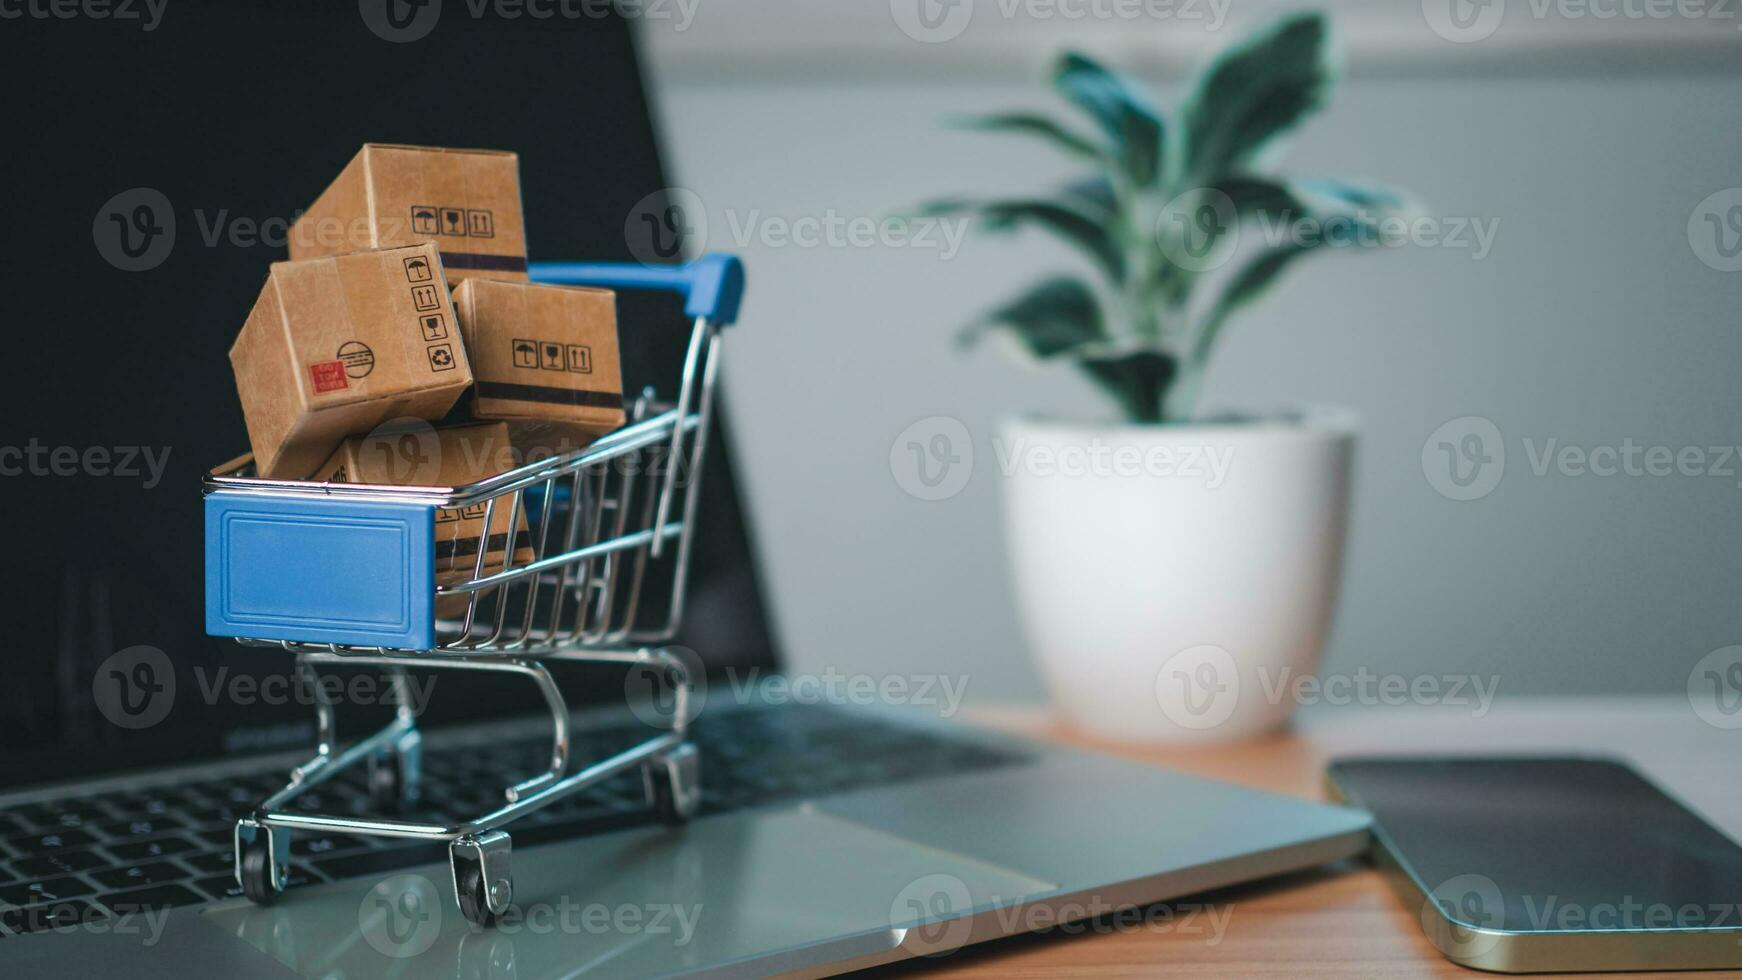 Shopping cart and product boxes placed on laptop computer represent online shopping concept, website, e-commerce, marketplace platform, technology  and online payment concept. photo